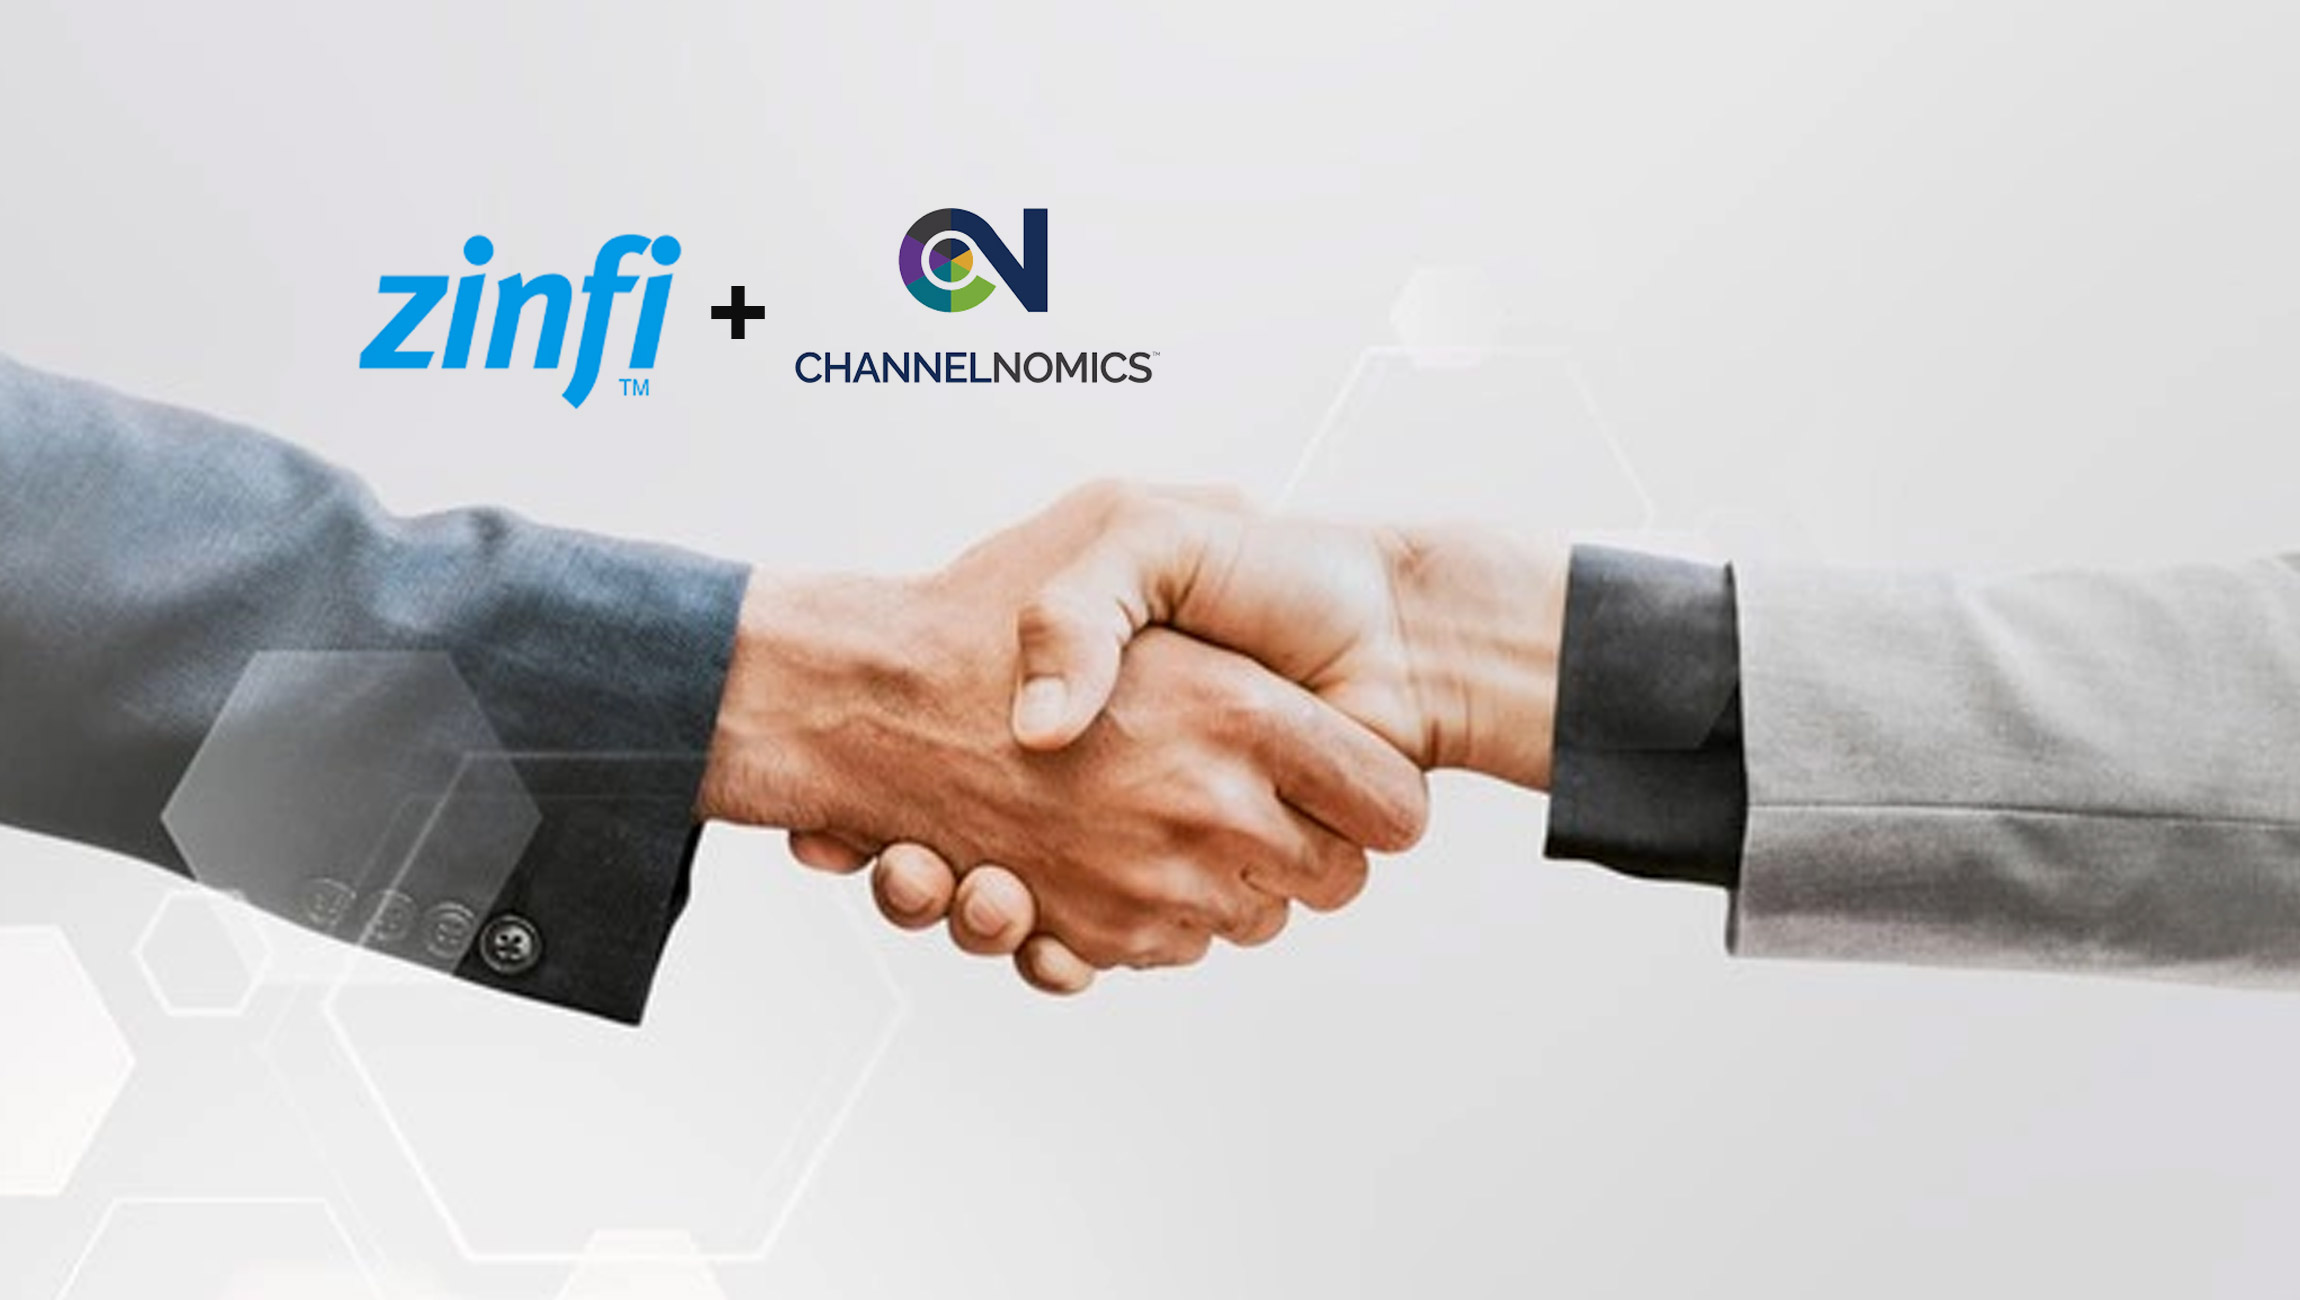 ZINFI and Channelnomics Announce Strategic Partnership to Provide Channel Solutions to Mid-Market and Enterprise Organizations